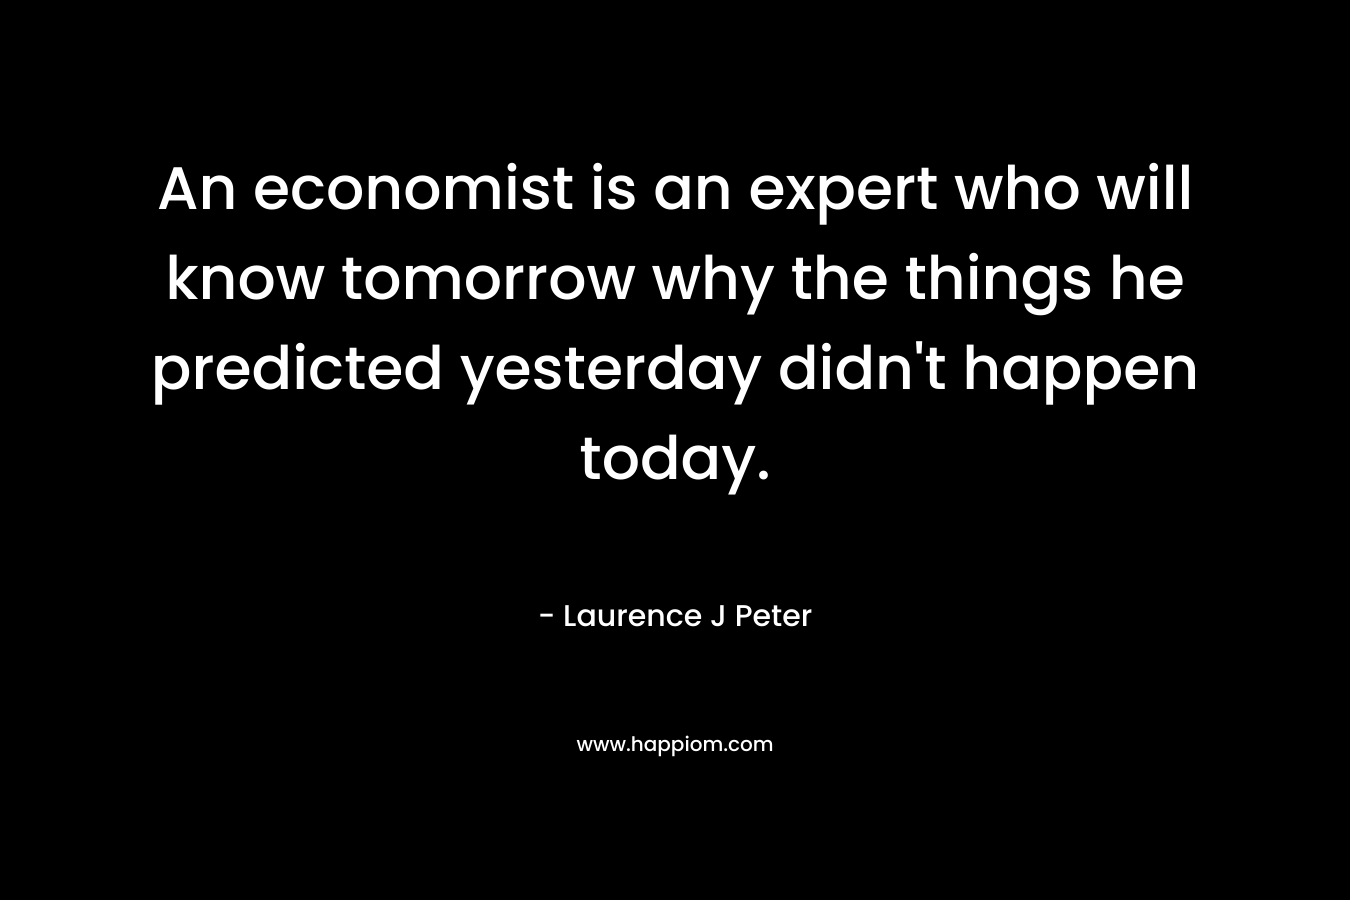 An economist is an expert who will know tomorrow why the things he predicted yesterday didn’t happen today. – Laurence J Peter